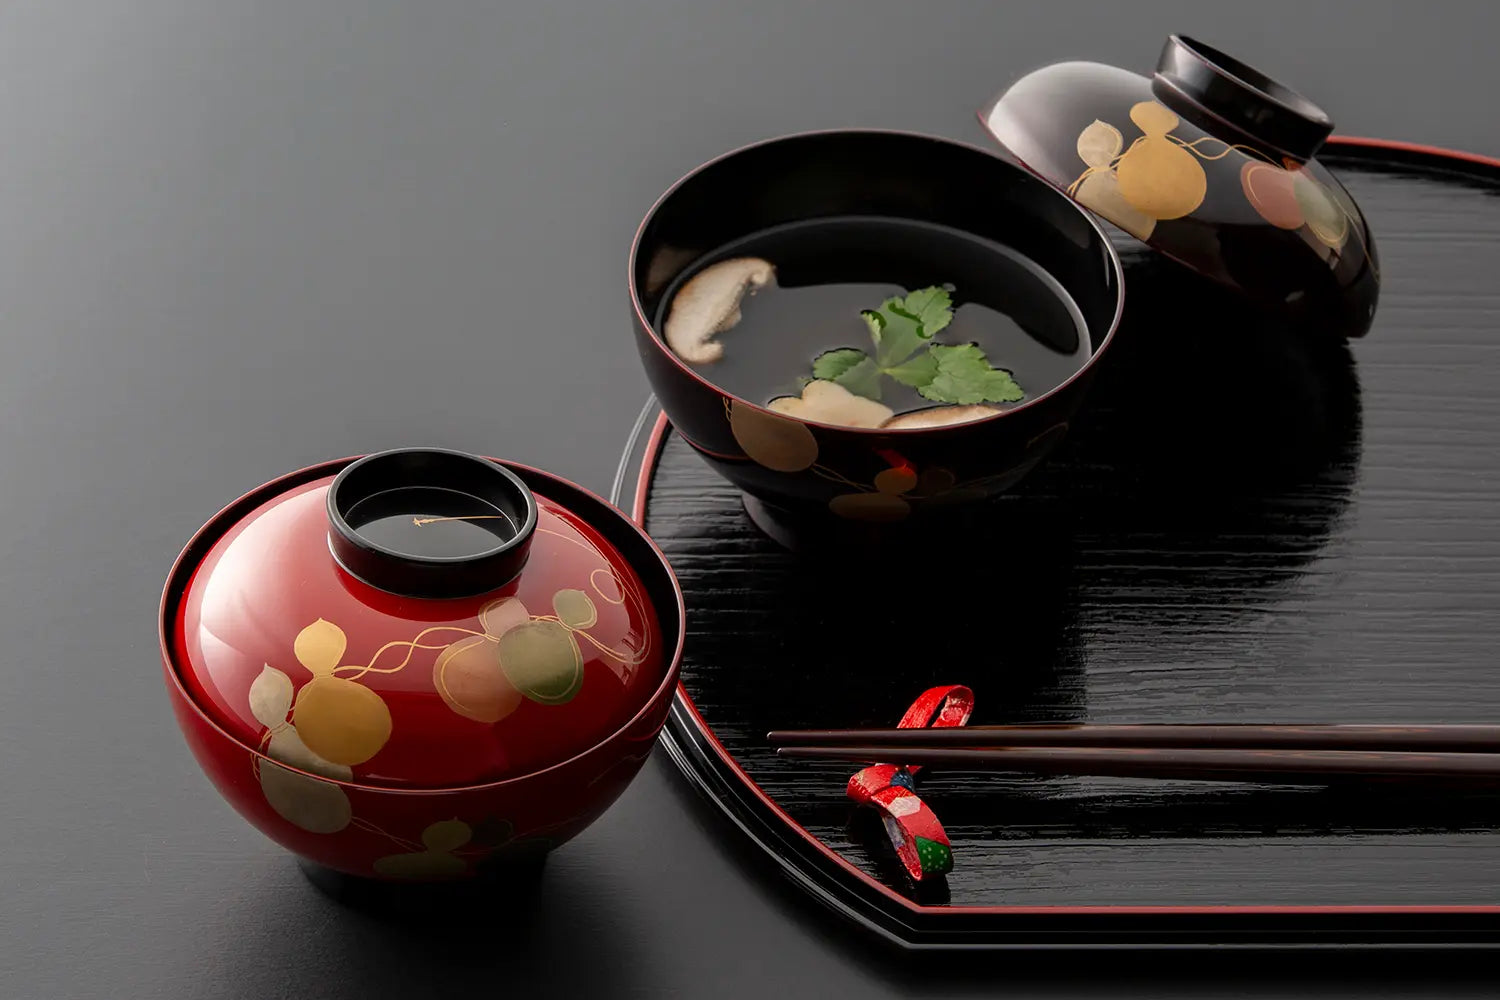 Lacquerware comes in different forms: soup bowls for serving miso soup, rice bowls, multi-tiered Jubako boxes for serving Japanese New Year dishes, small plates, and teacups etc.